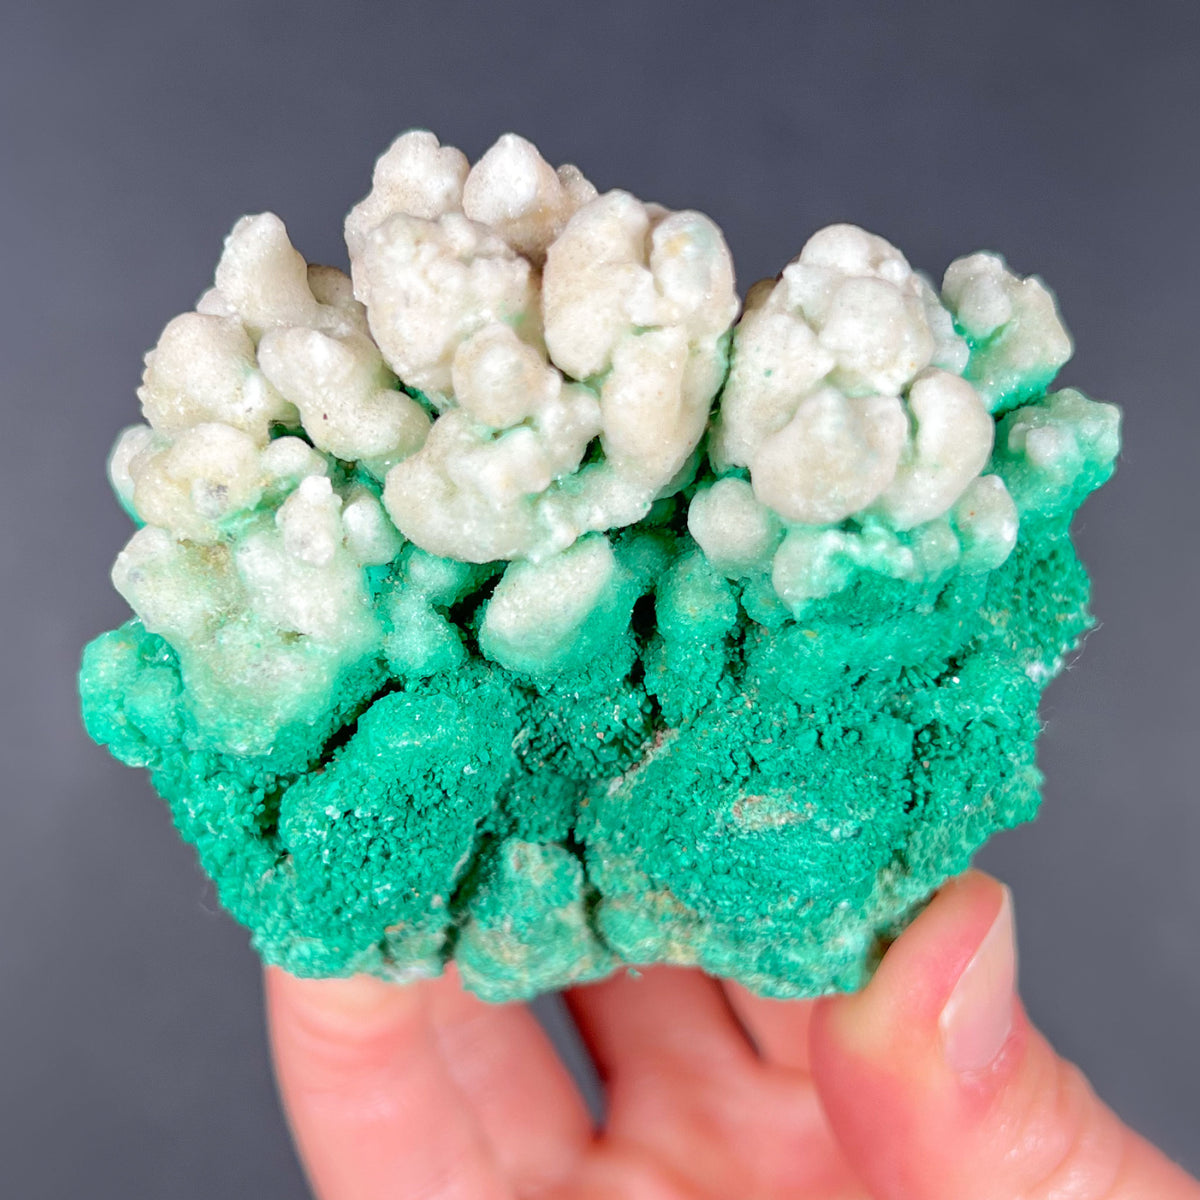 White and Green Selenite Crystals from Australia